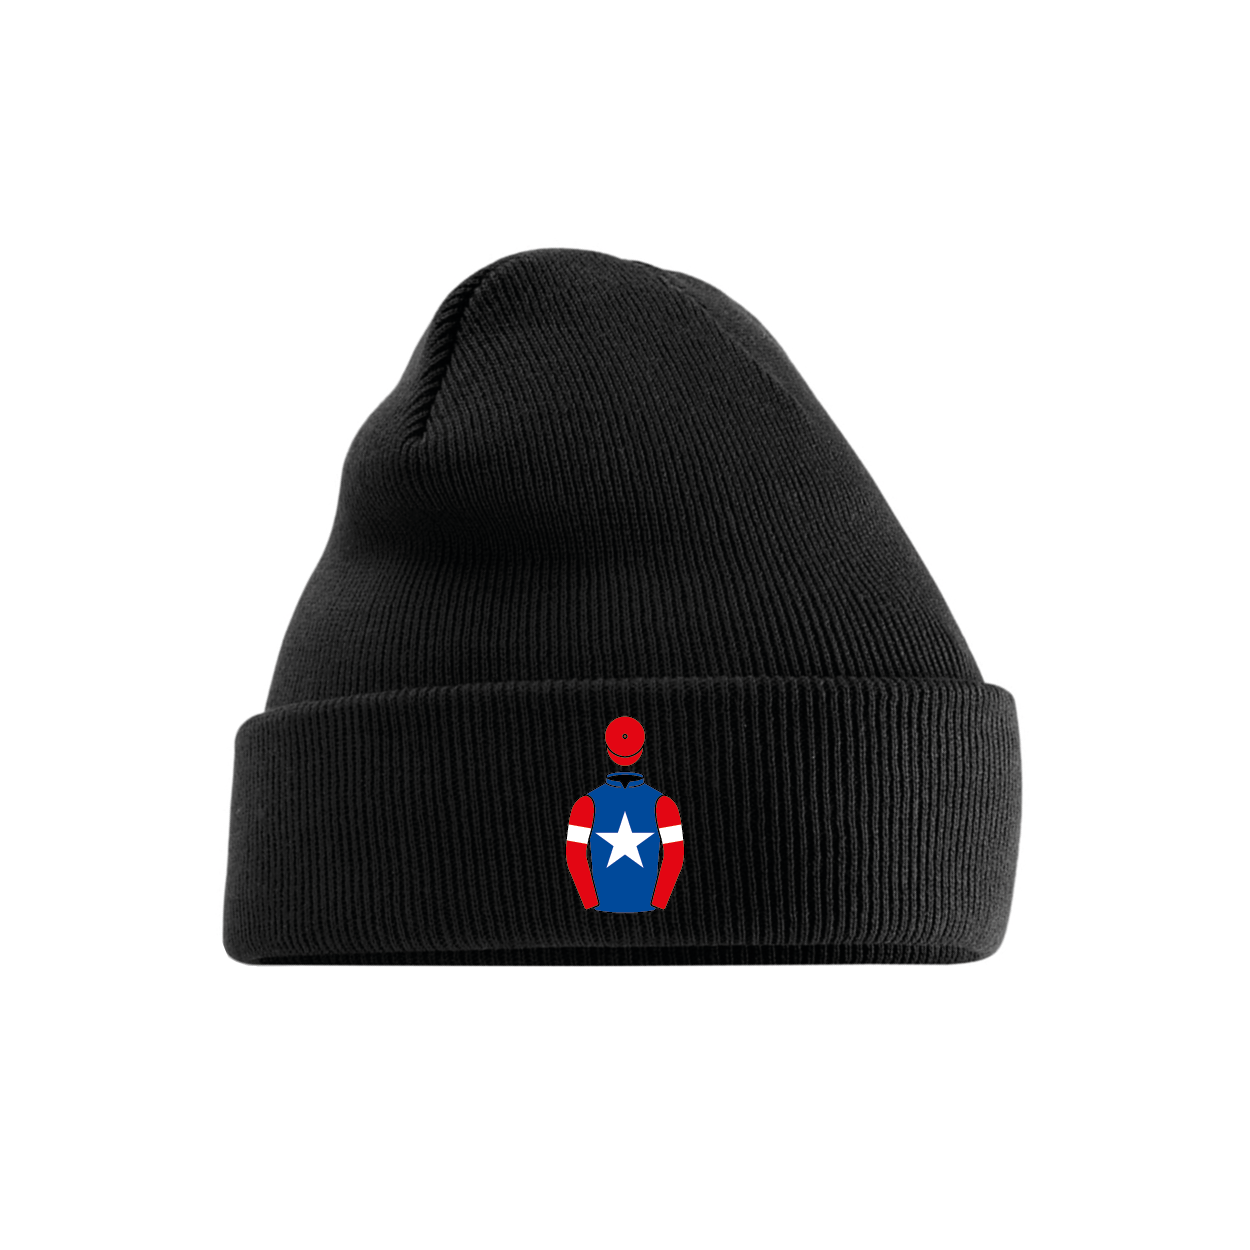 The Racing Emporium Embroidered Cuffed Beanie - Hacked Up